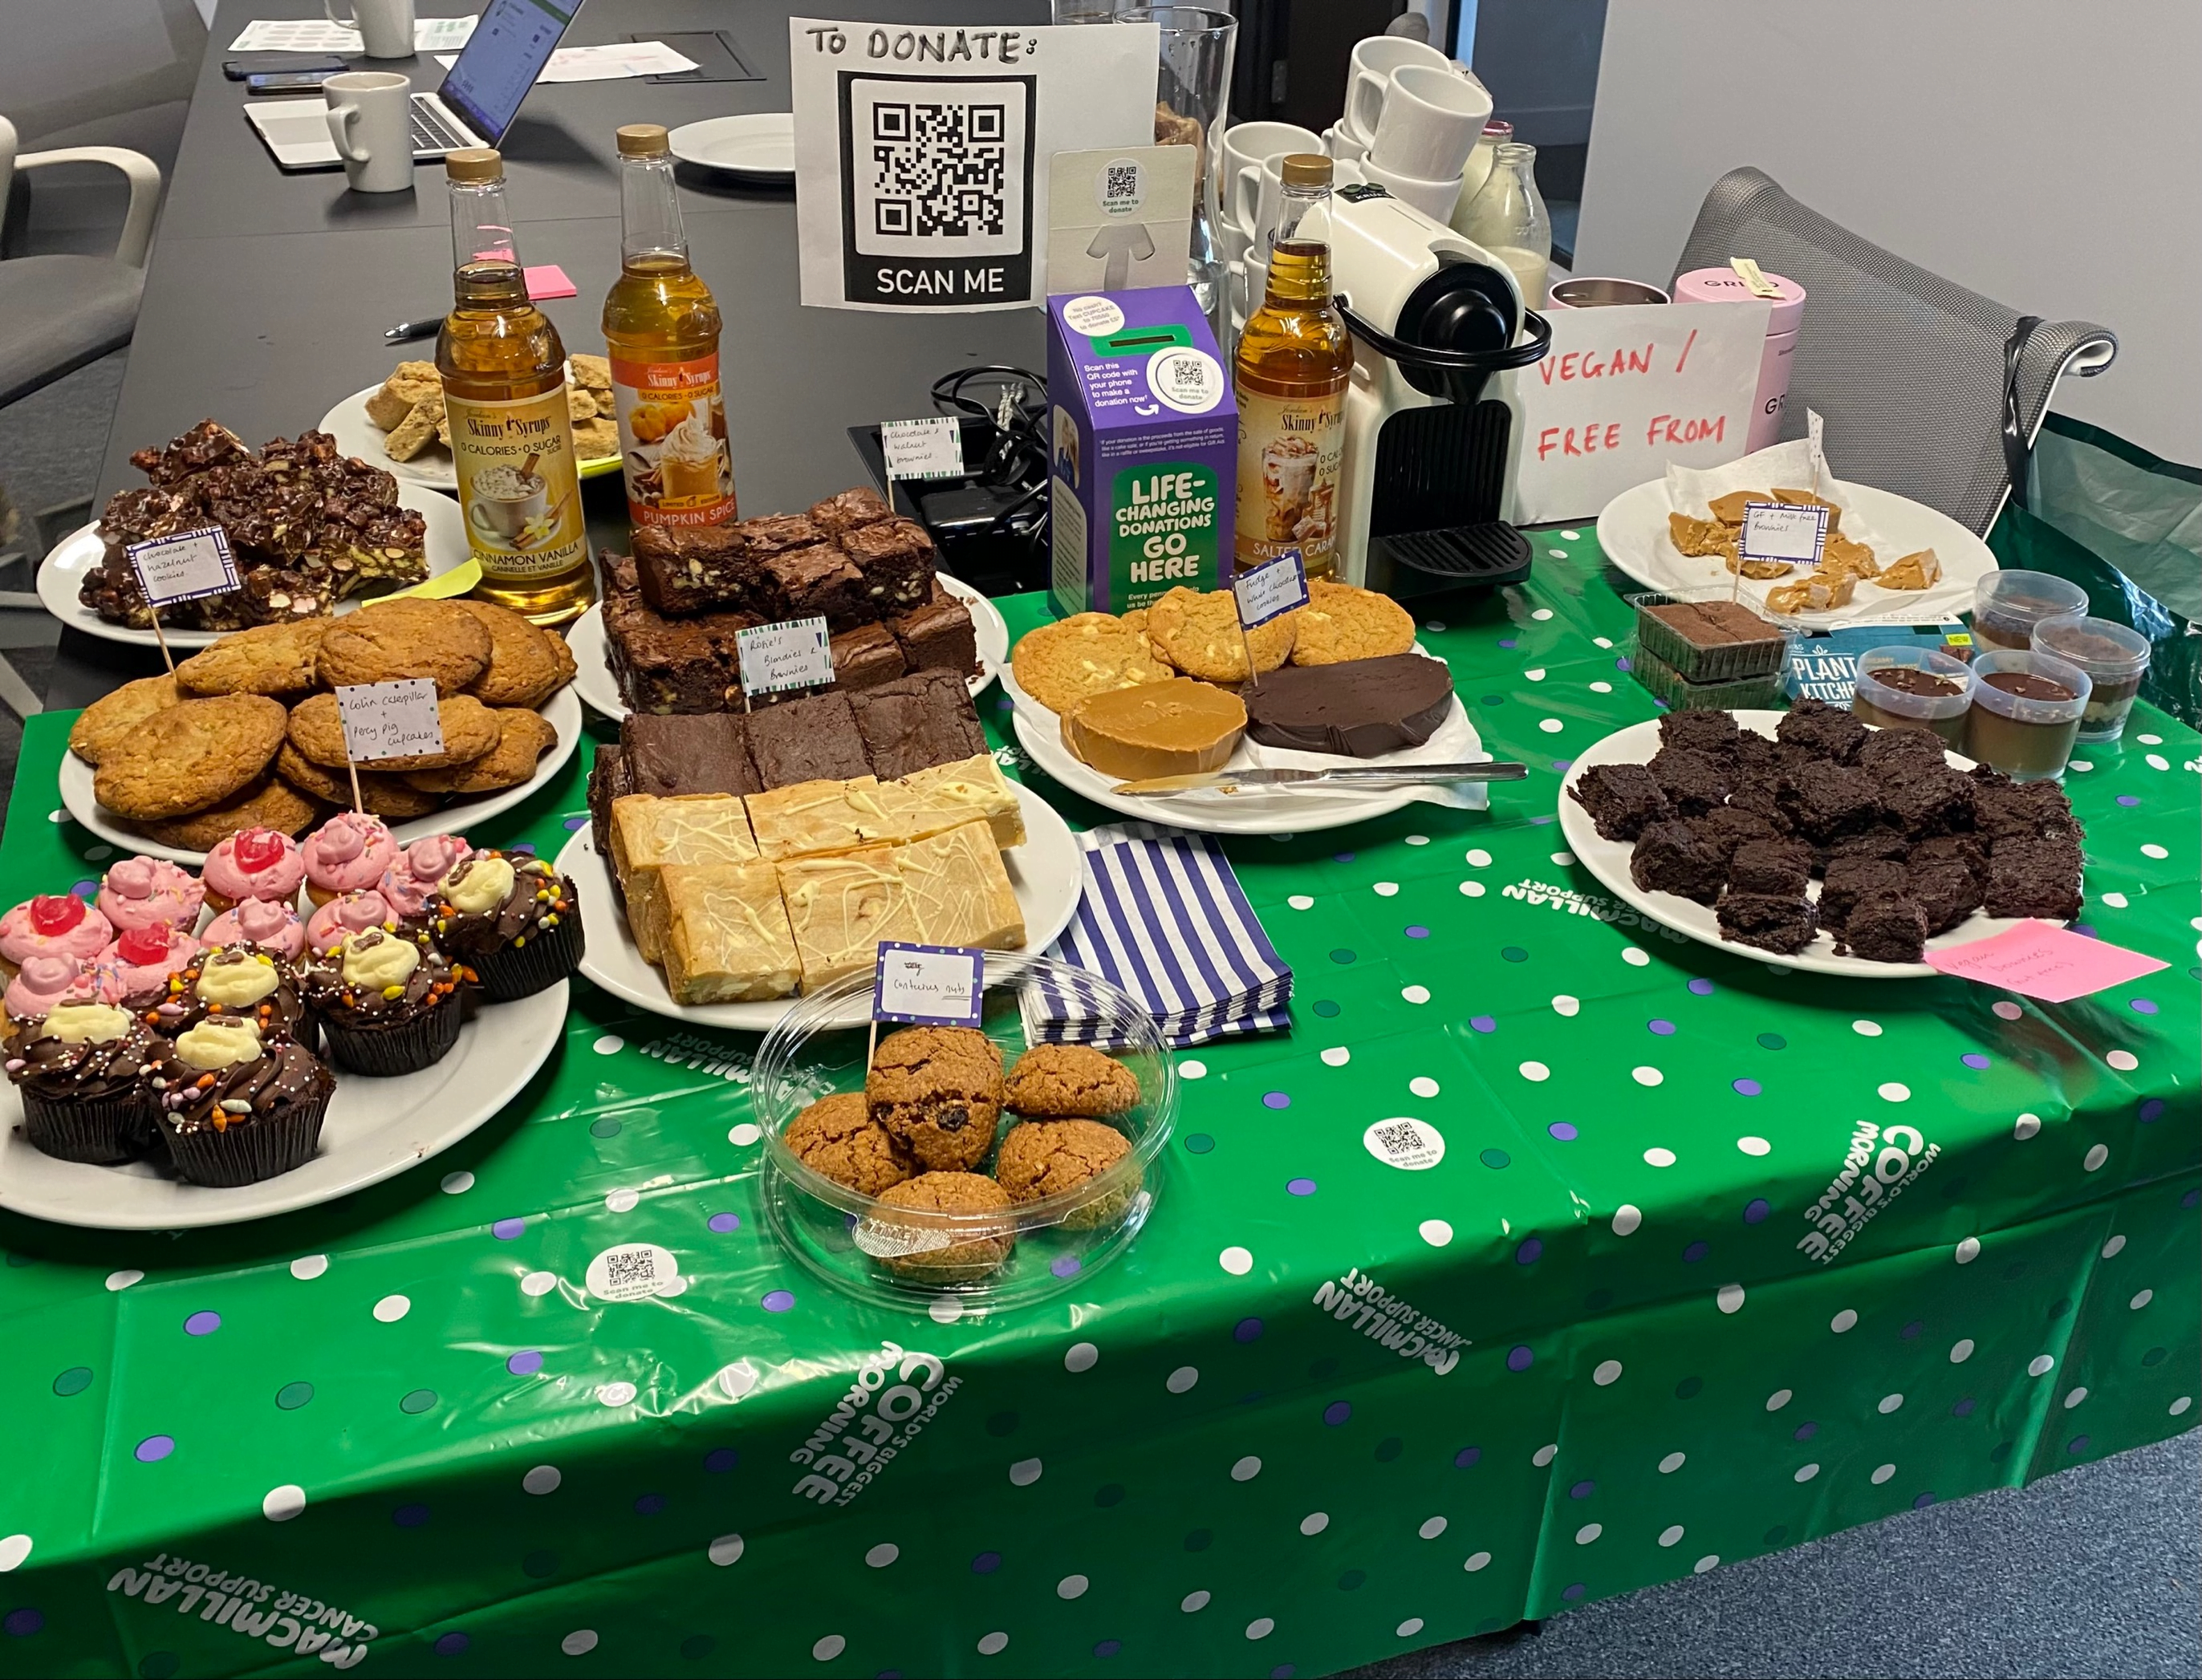 Macmillan Coffee Morning Cakes and Coffee on a table